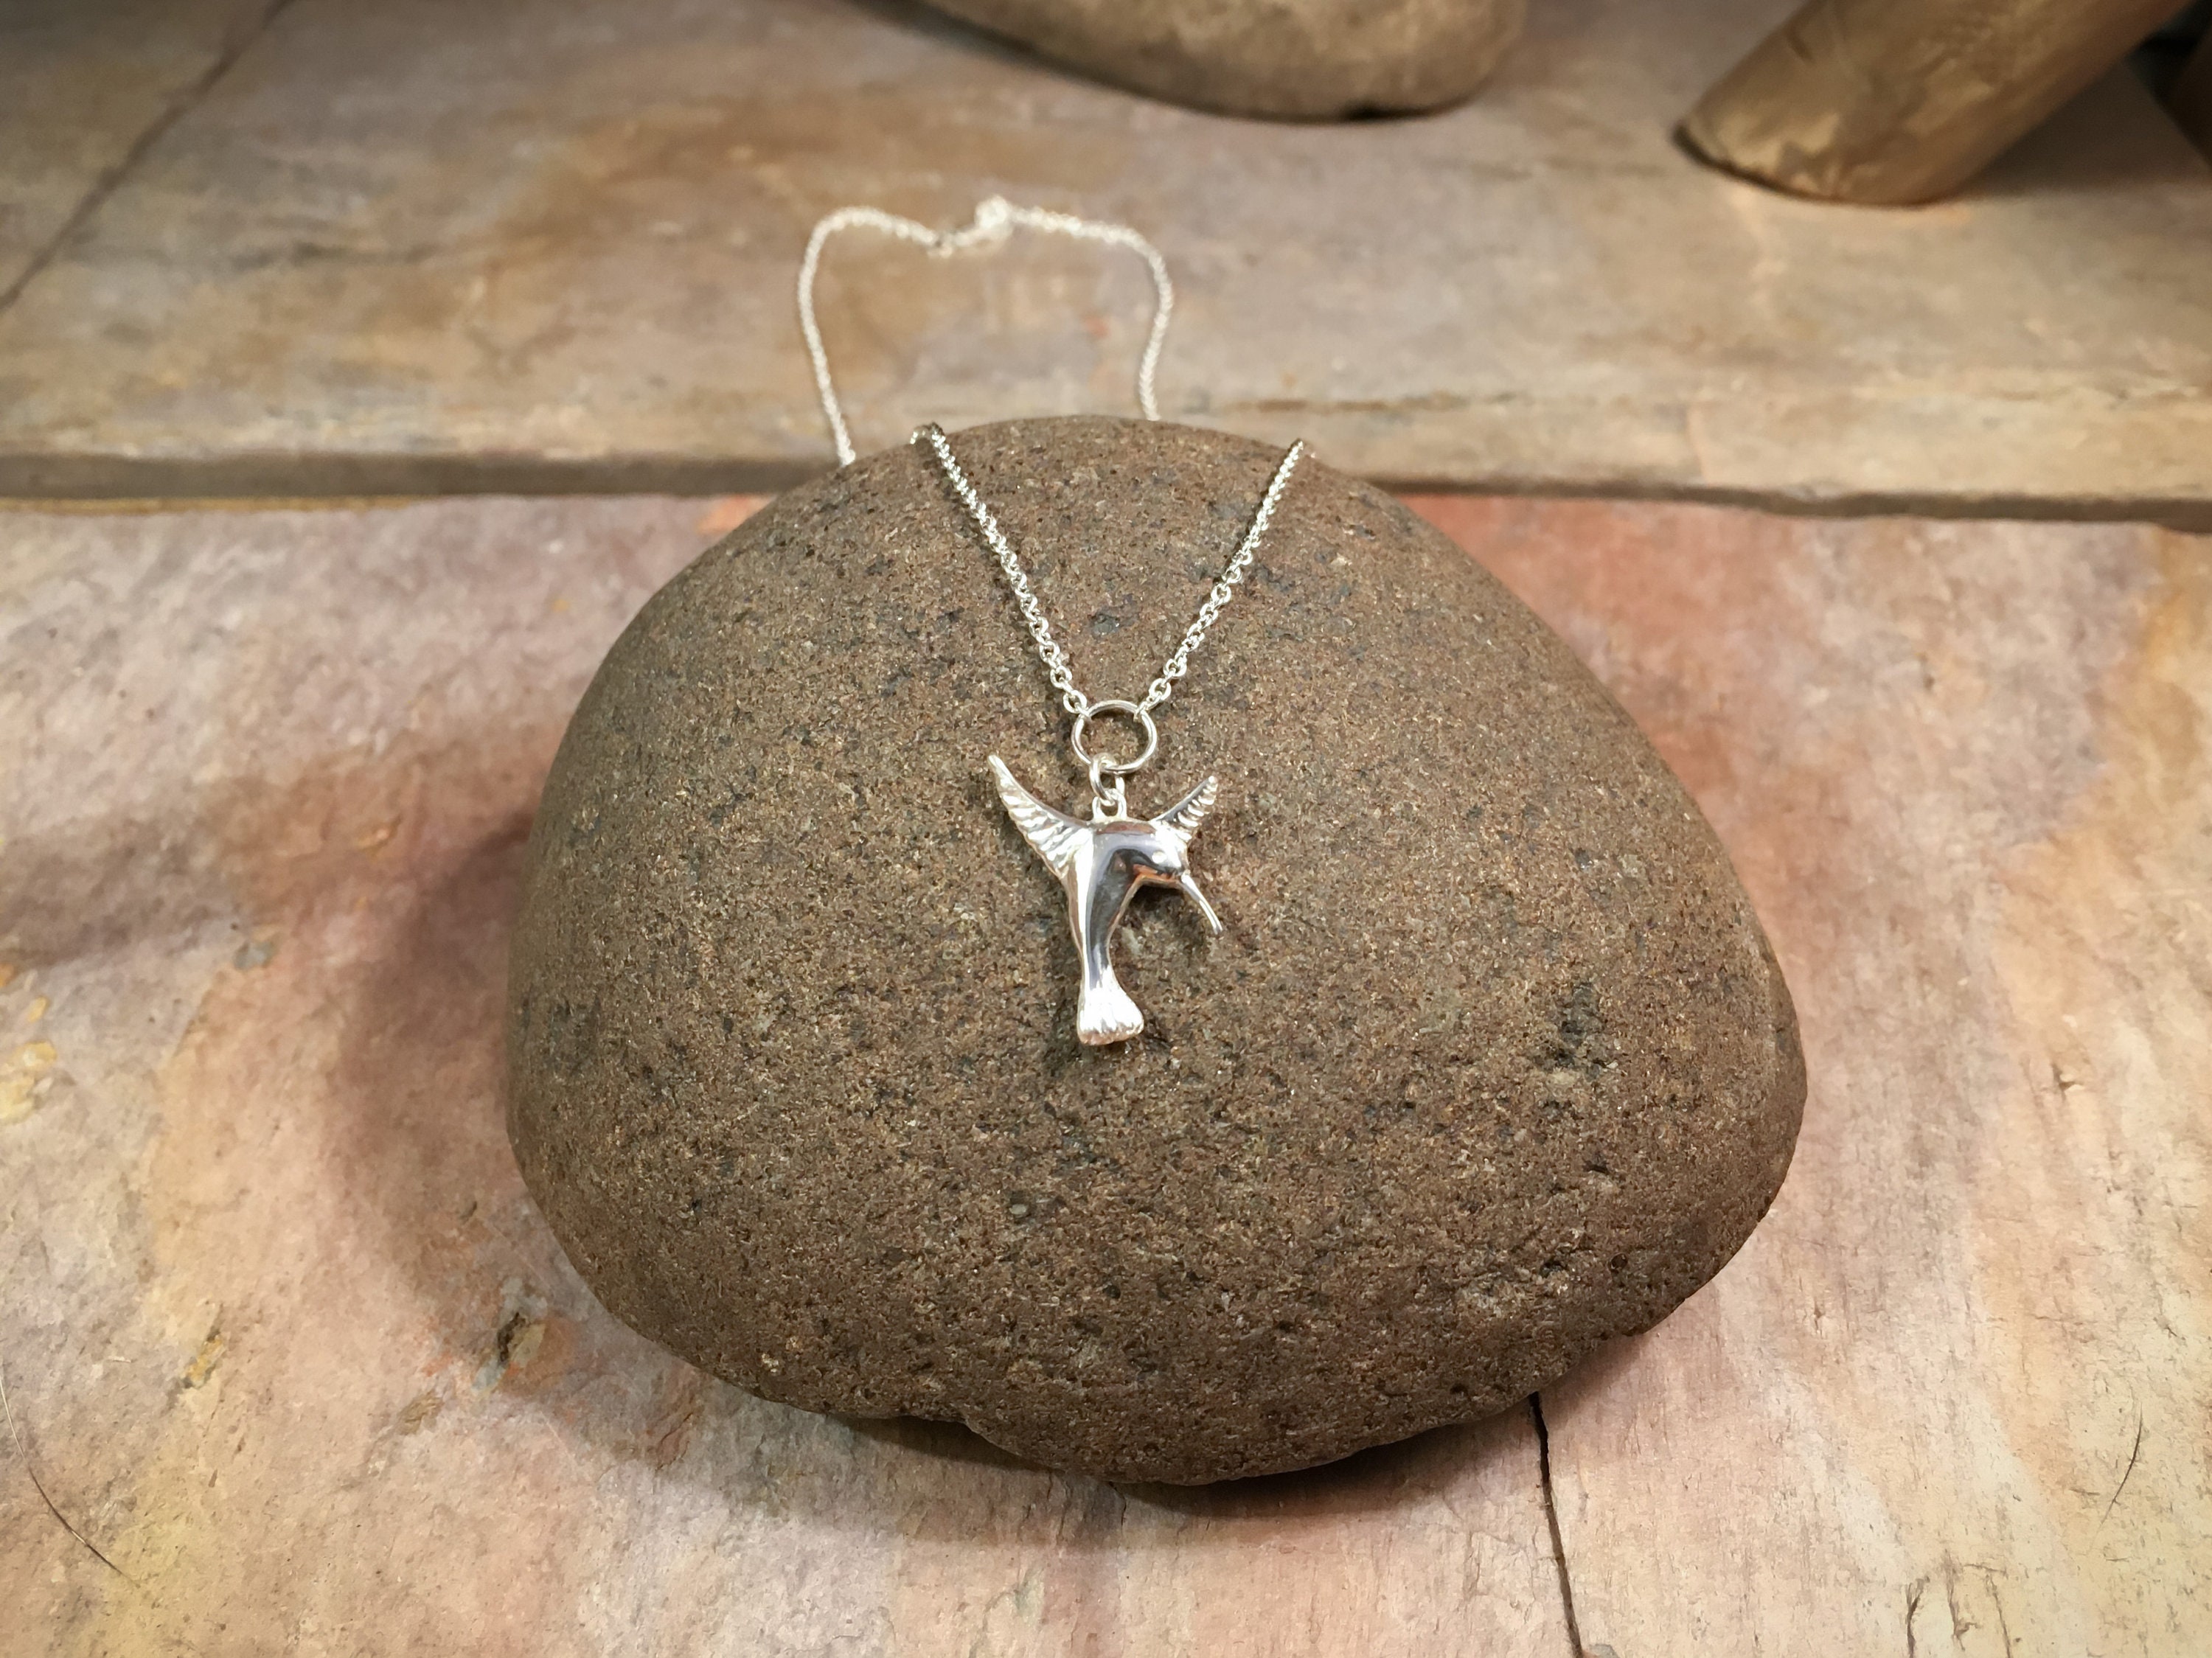 Humming Bird Necklace in solid Sterling Silver - High end fine jewelry anniversary gifts, birthday gifts, gifts for wife or girlfriend gift!